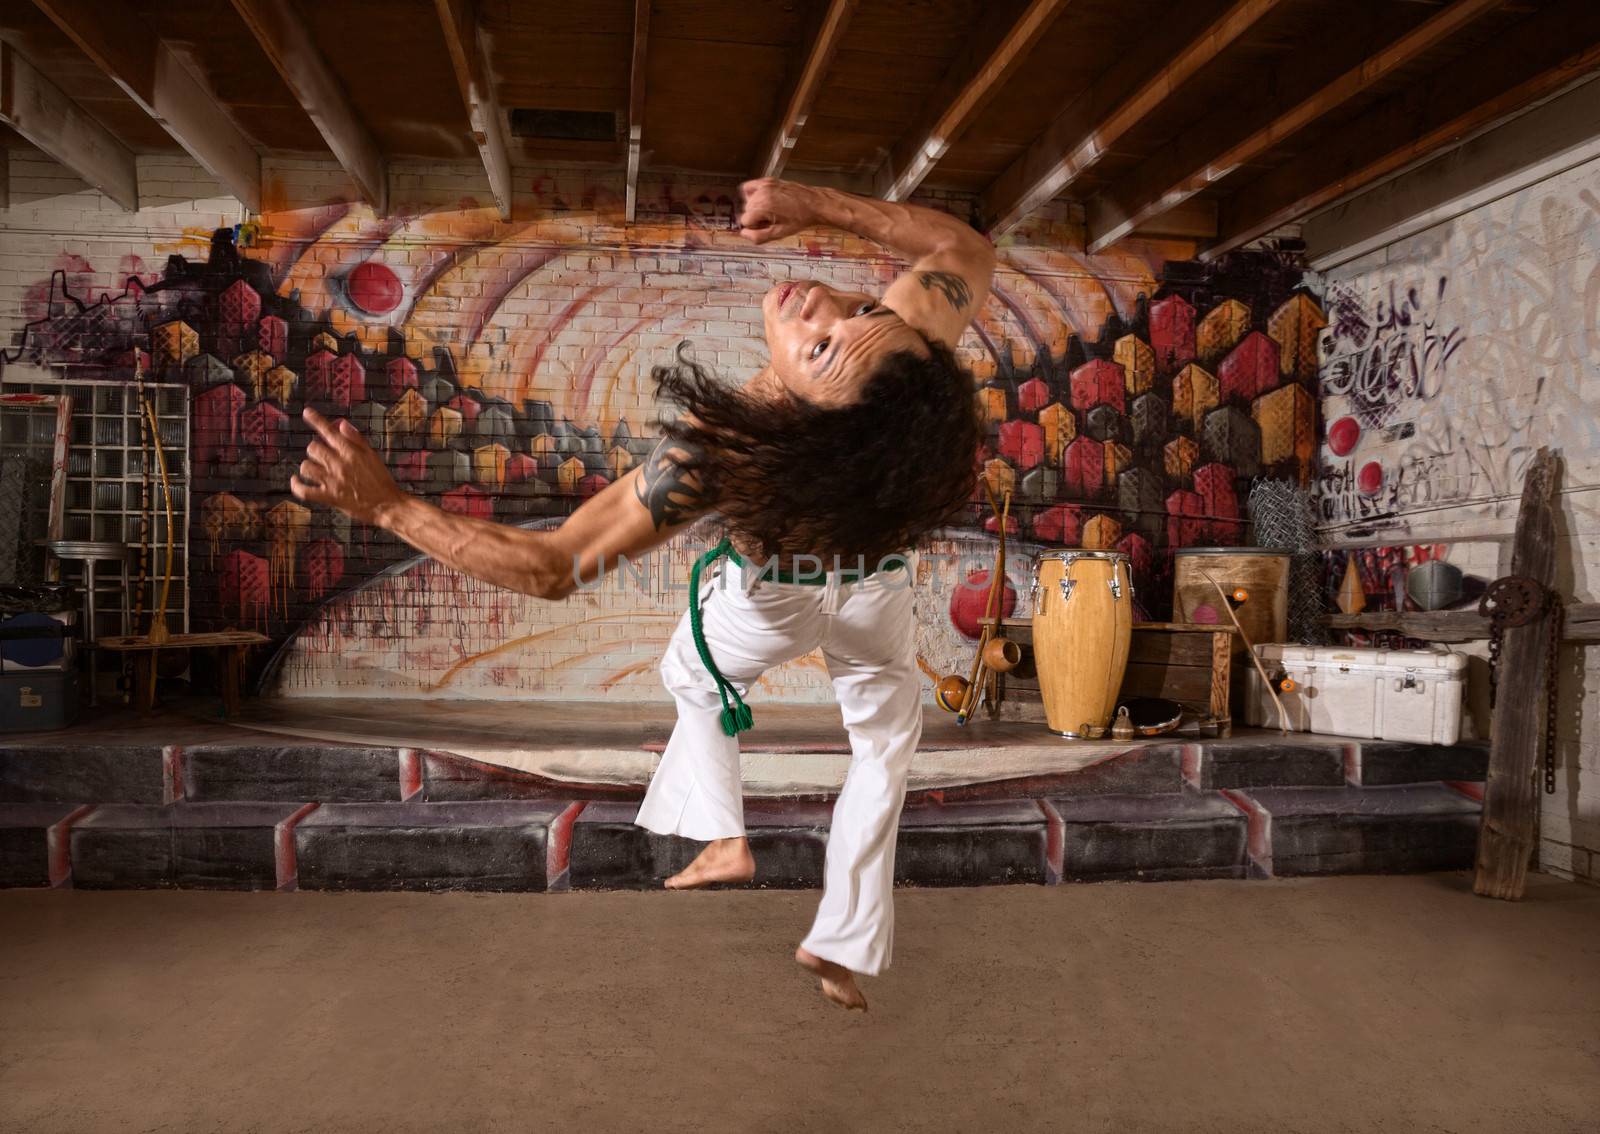 Young capoeira expert flipping over indoors